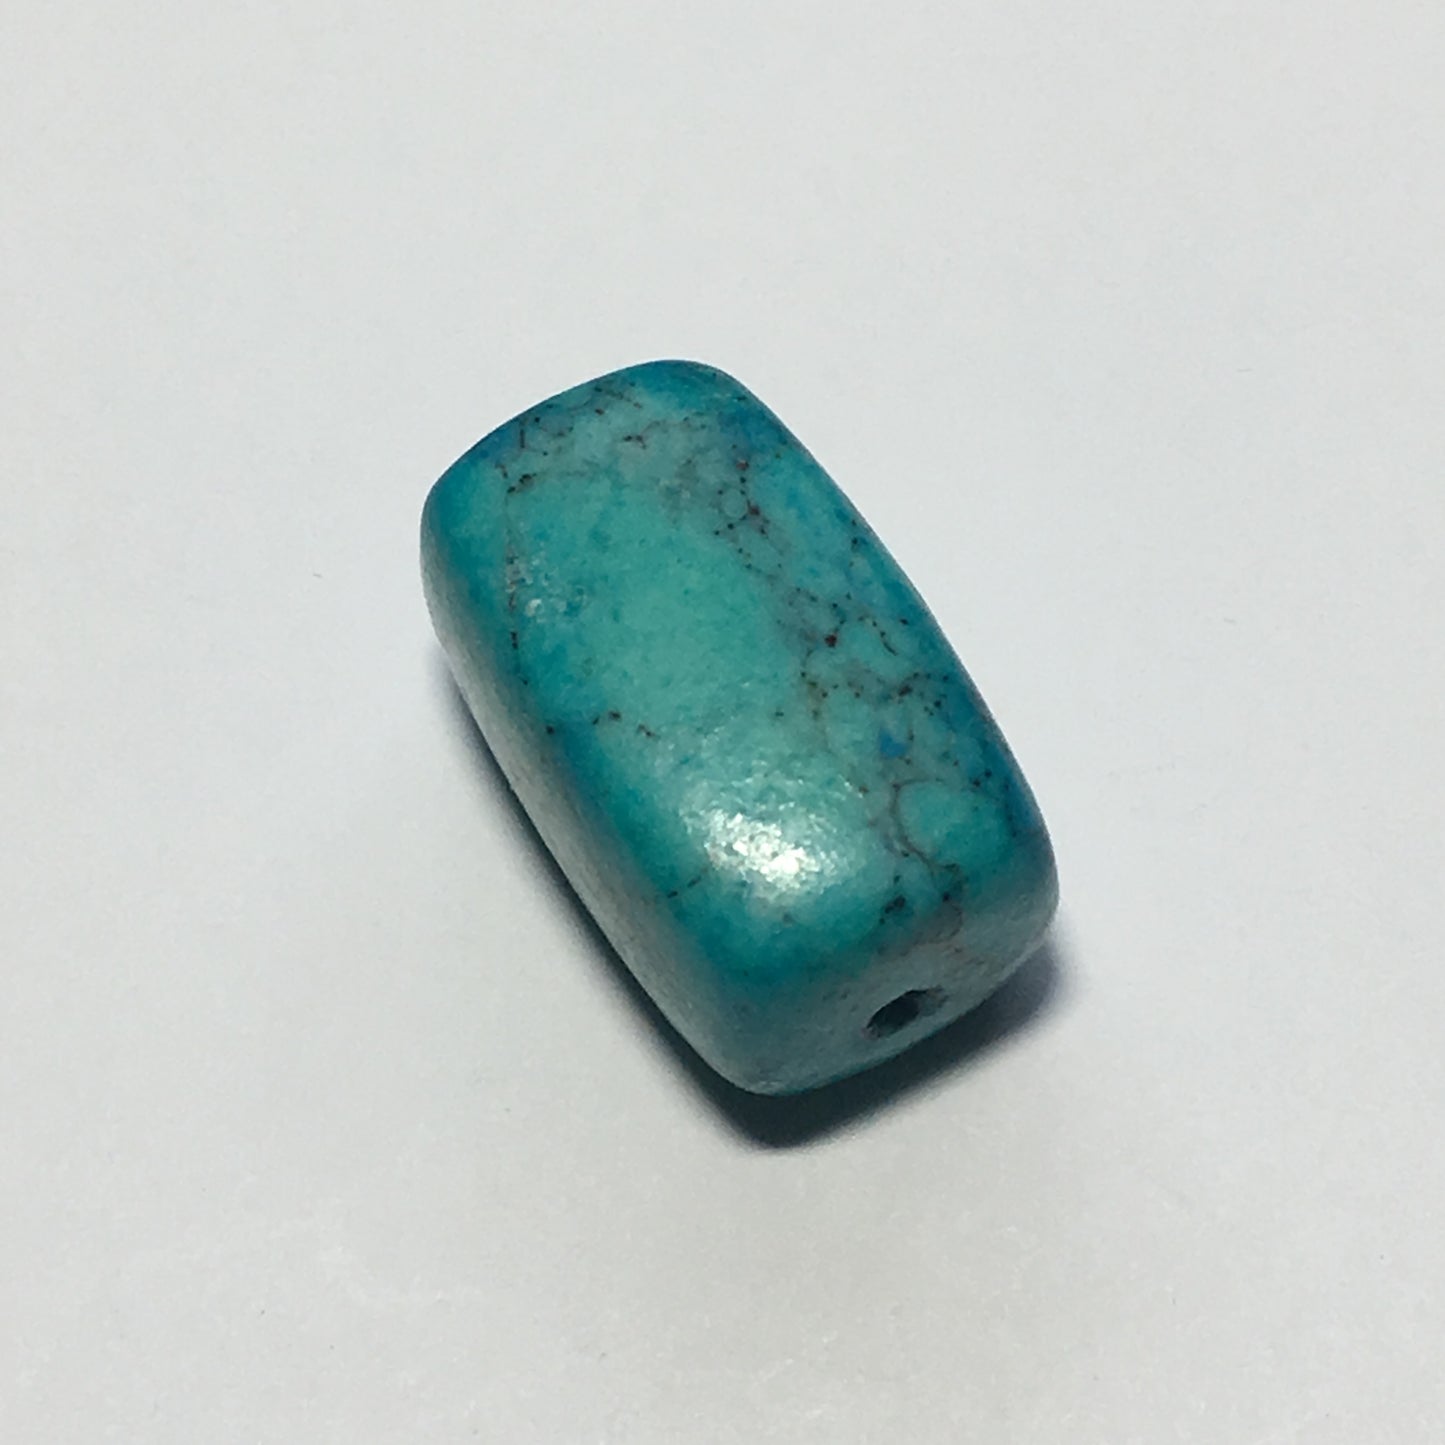 Turquoise Color Rectangular Focal Bead, 20 x 13 mm